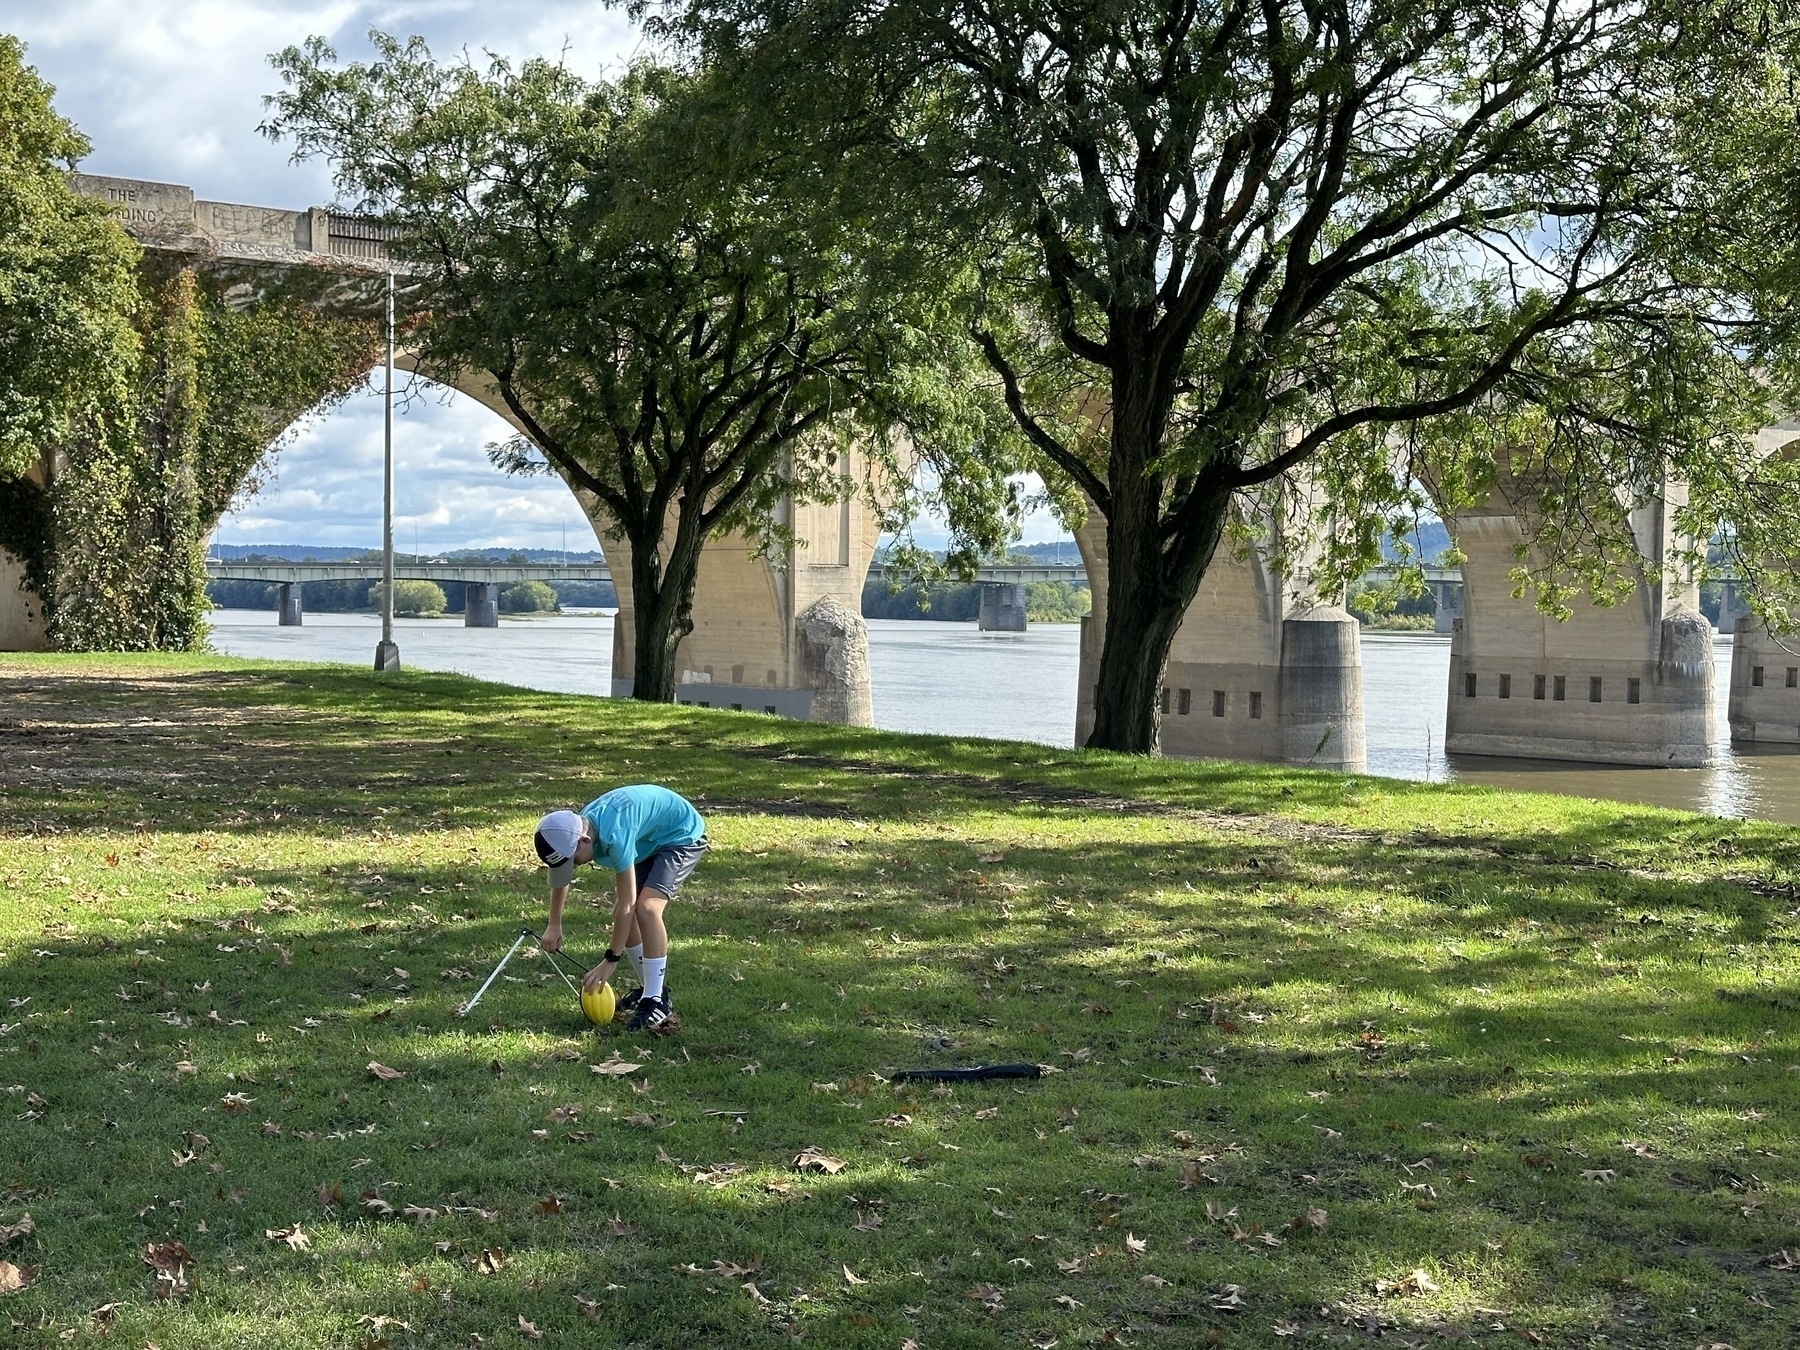 Mozzie setting up the football to kick at Riverfront Park in harrisburg pennsylvania. River and arch bridge in the background.